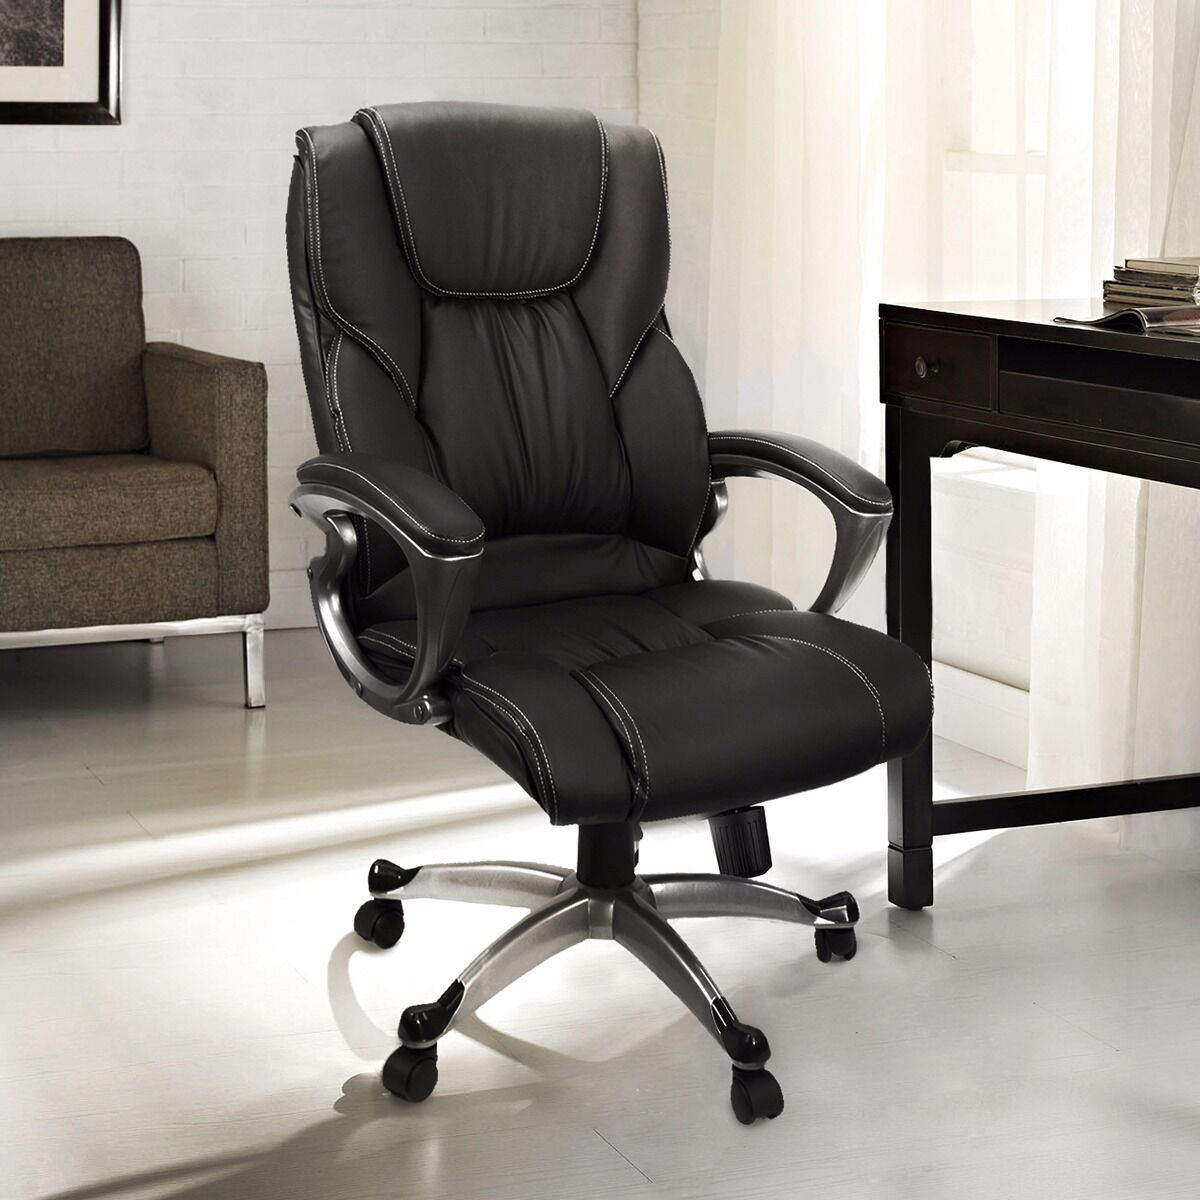 The best office chair manufacturers in 2022